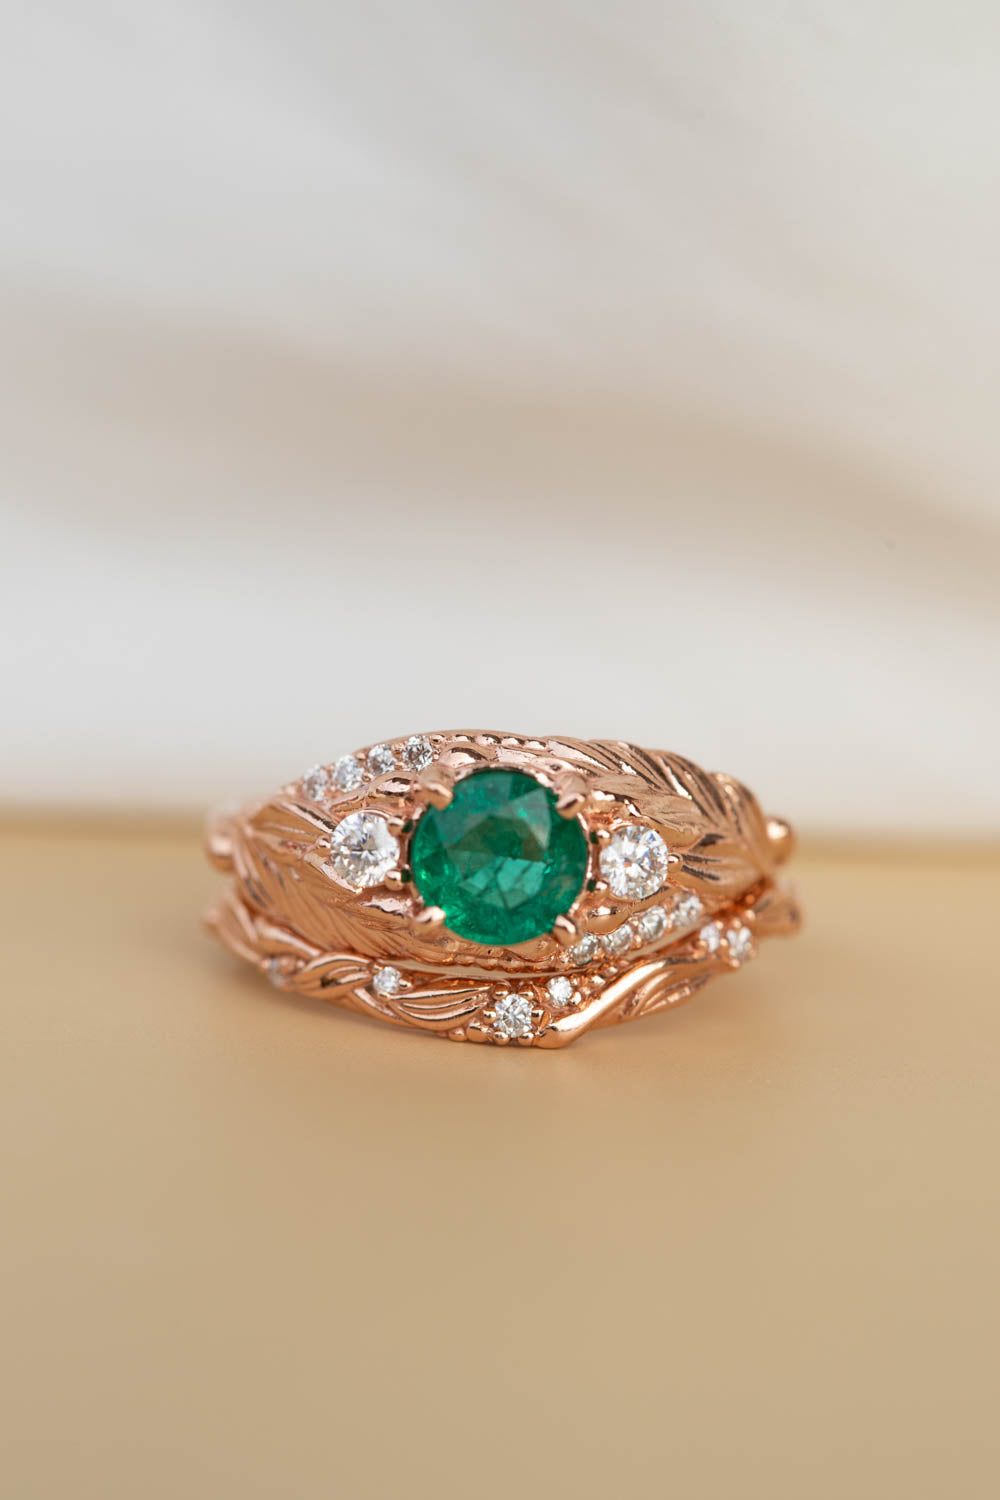 Emerald and diamonds engagement ring, nature themed rose gold leaves proposal ring / Verdi - Eden Garden Jewelry™